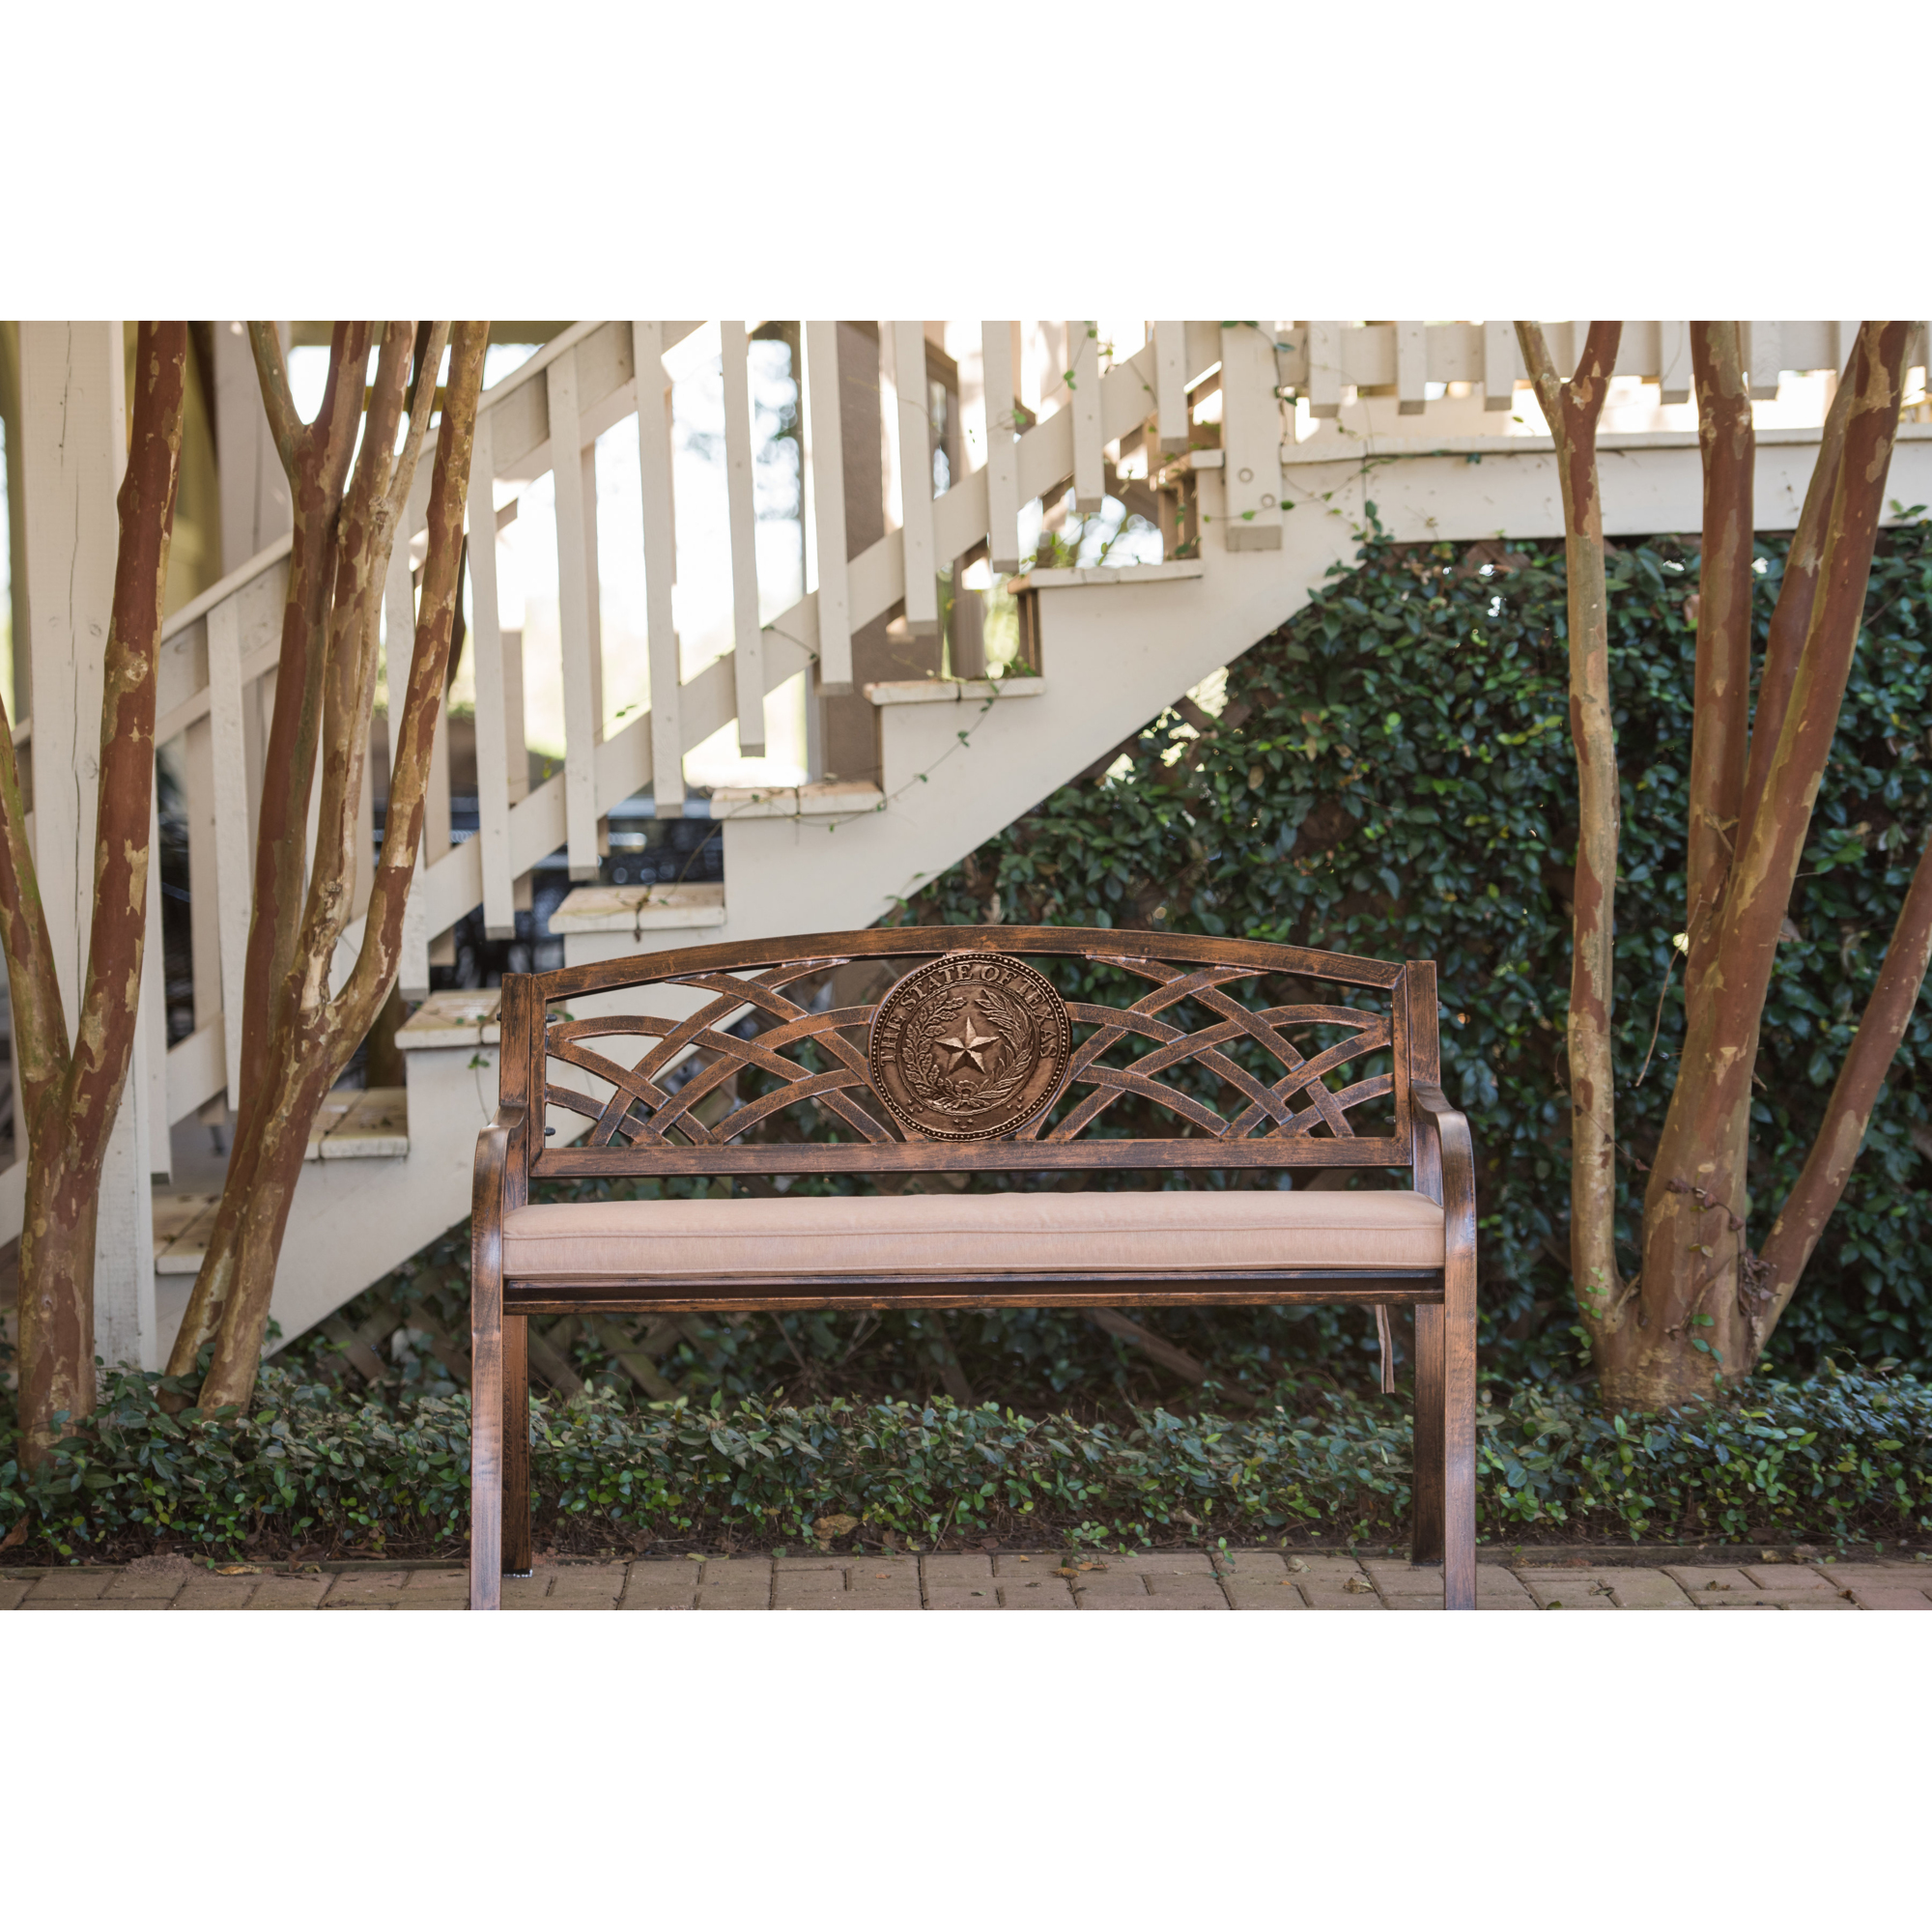 Leigh Country, Texas State Seal Garden Bench, Primary Color Bronze, Material Metal, Width 50.56 in, Model TX 93545